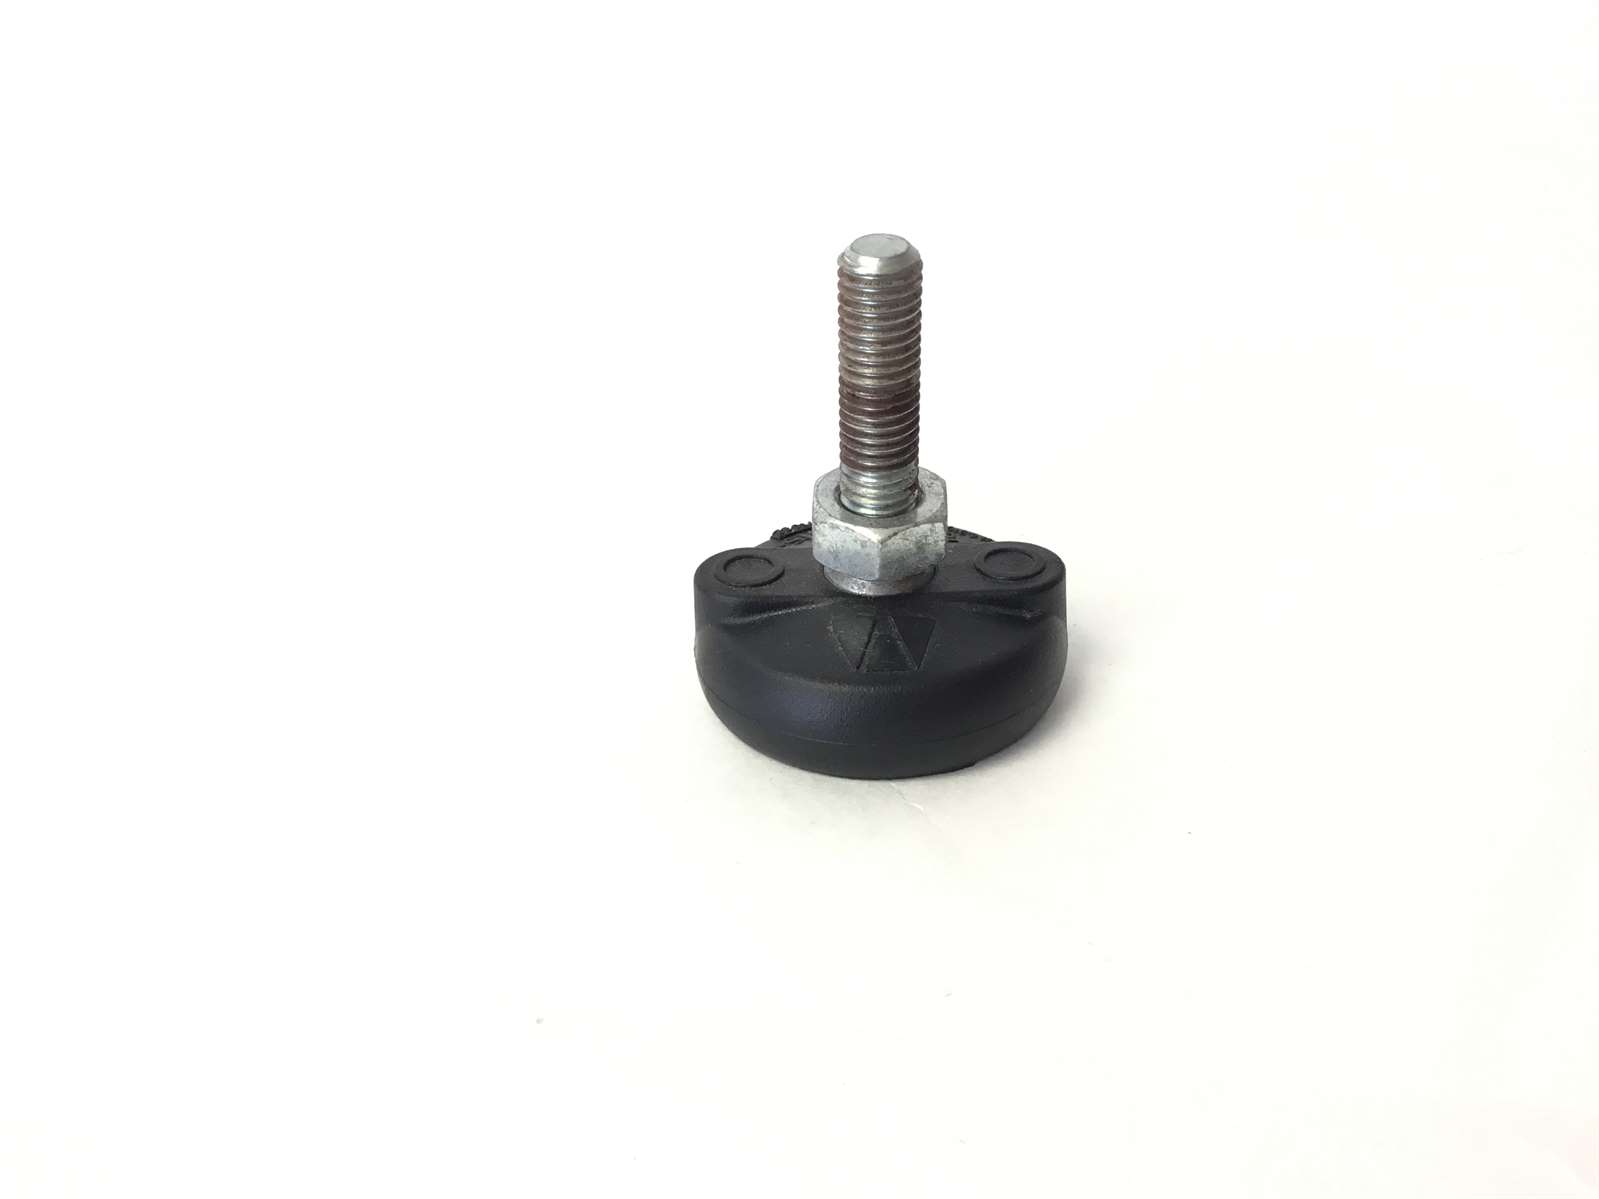 Rear Leveling Foot Leveler with Nut